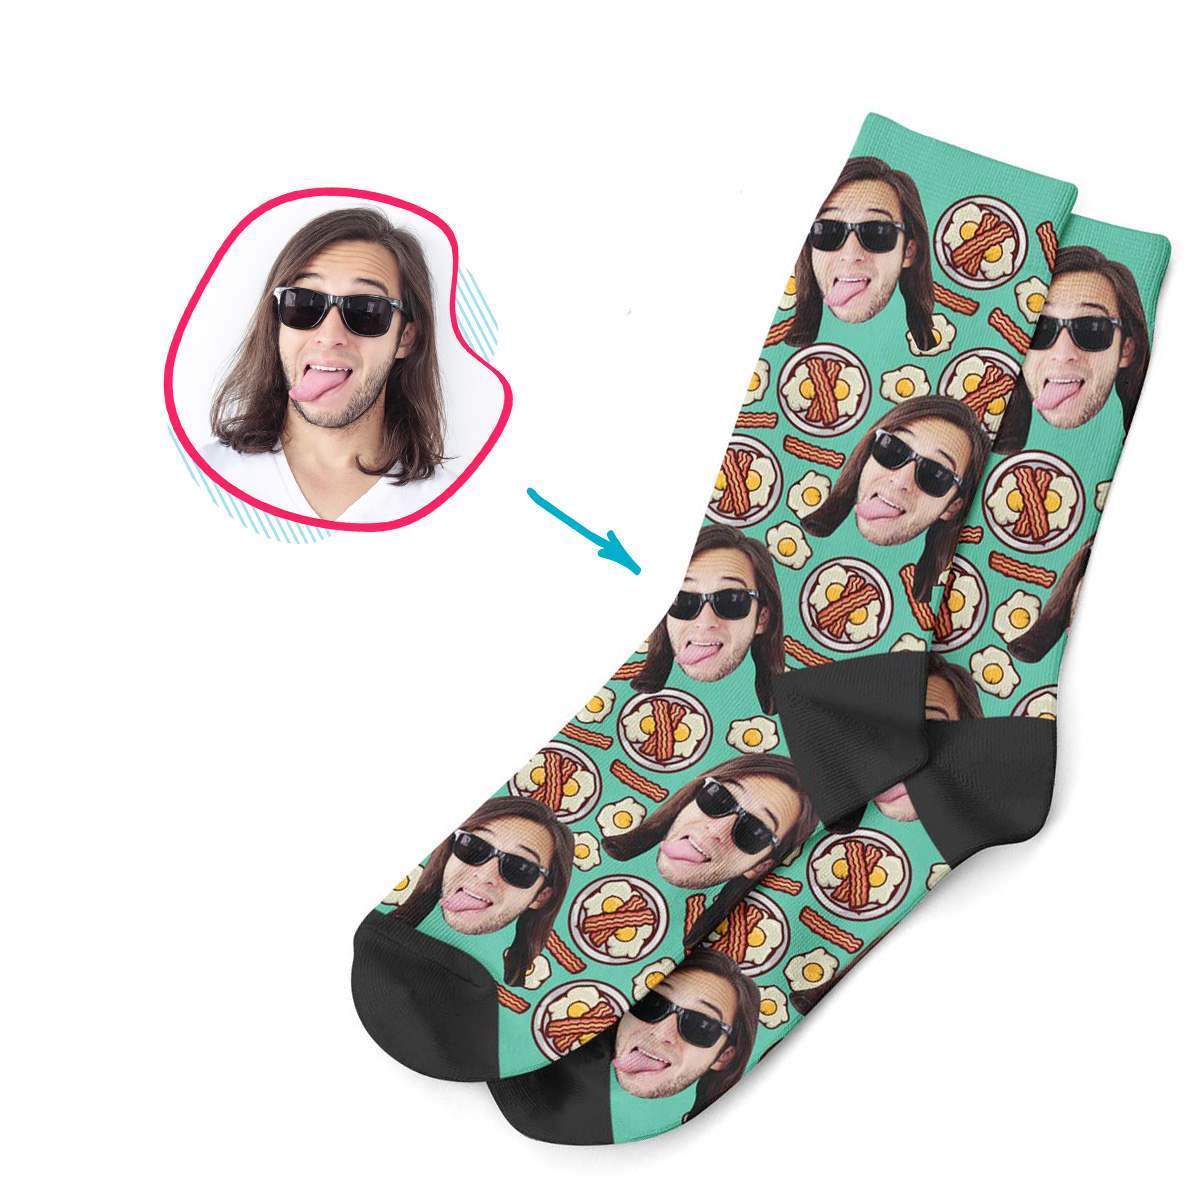 mint Bacon and Eggs socks personalized with photo of face printed on them